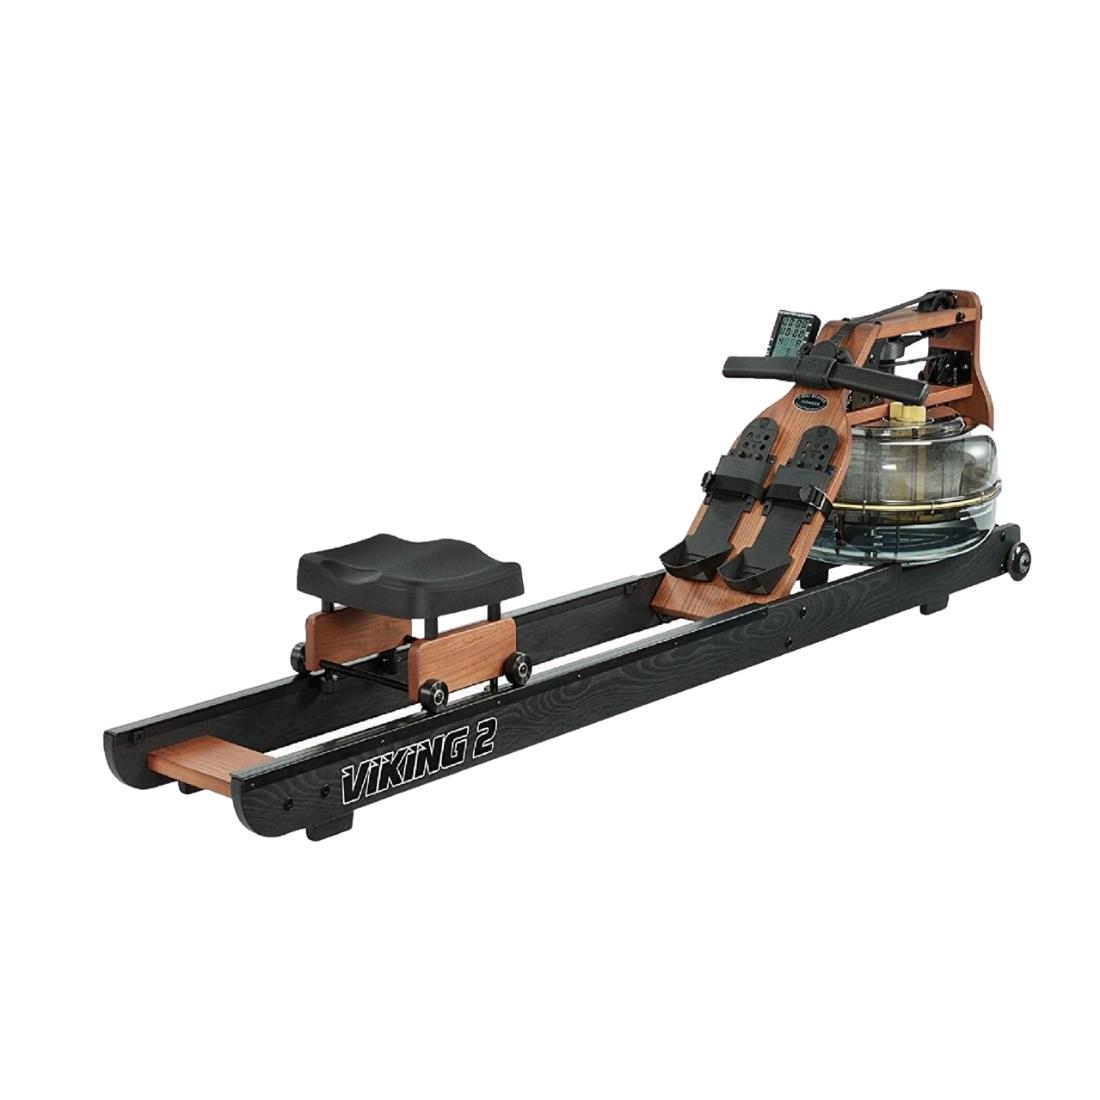 First Degree Fitness Viking 2 AR Plus Reserve Indoor Water Rower